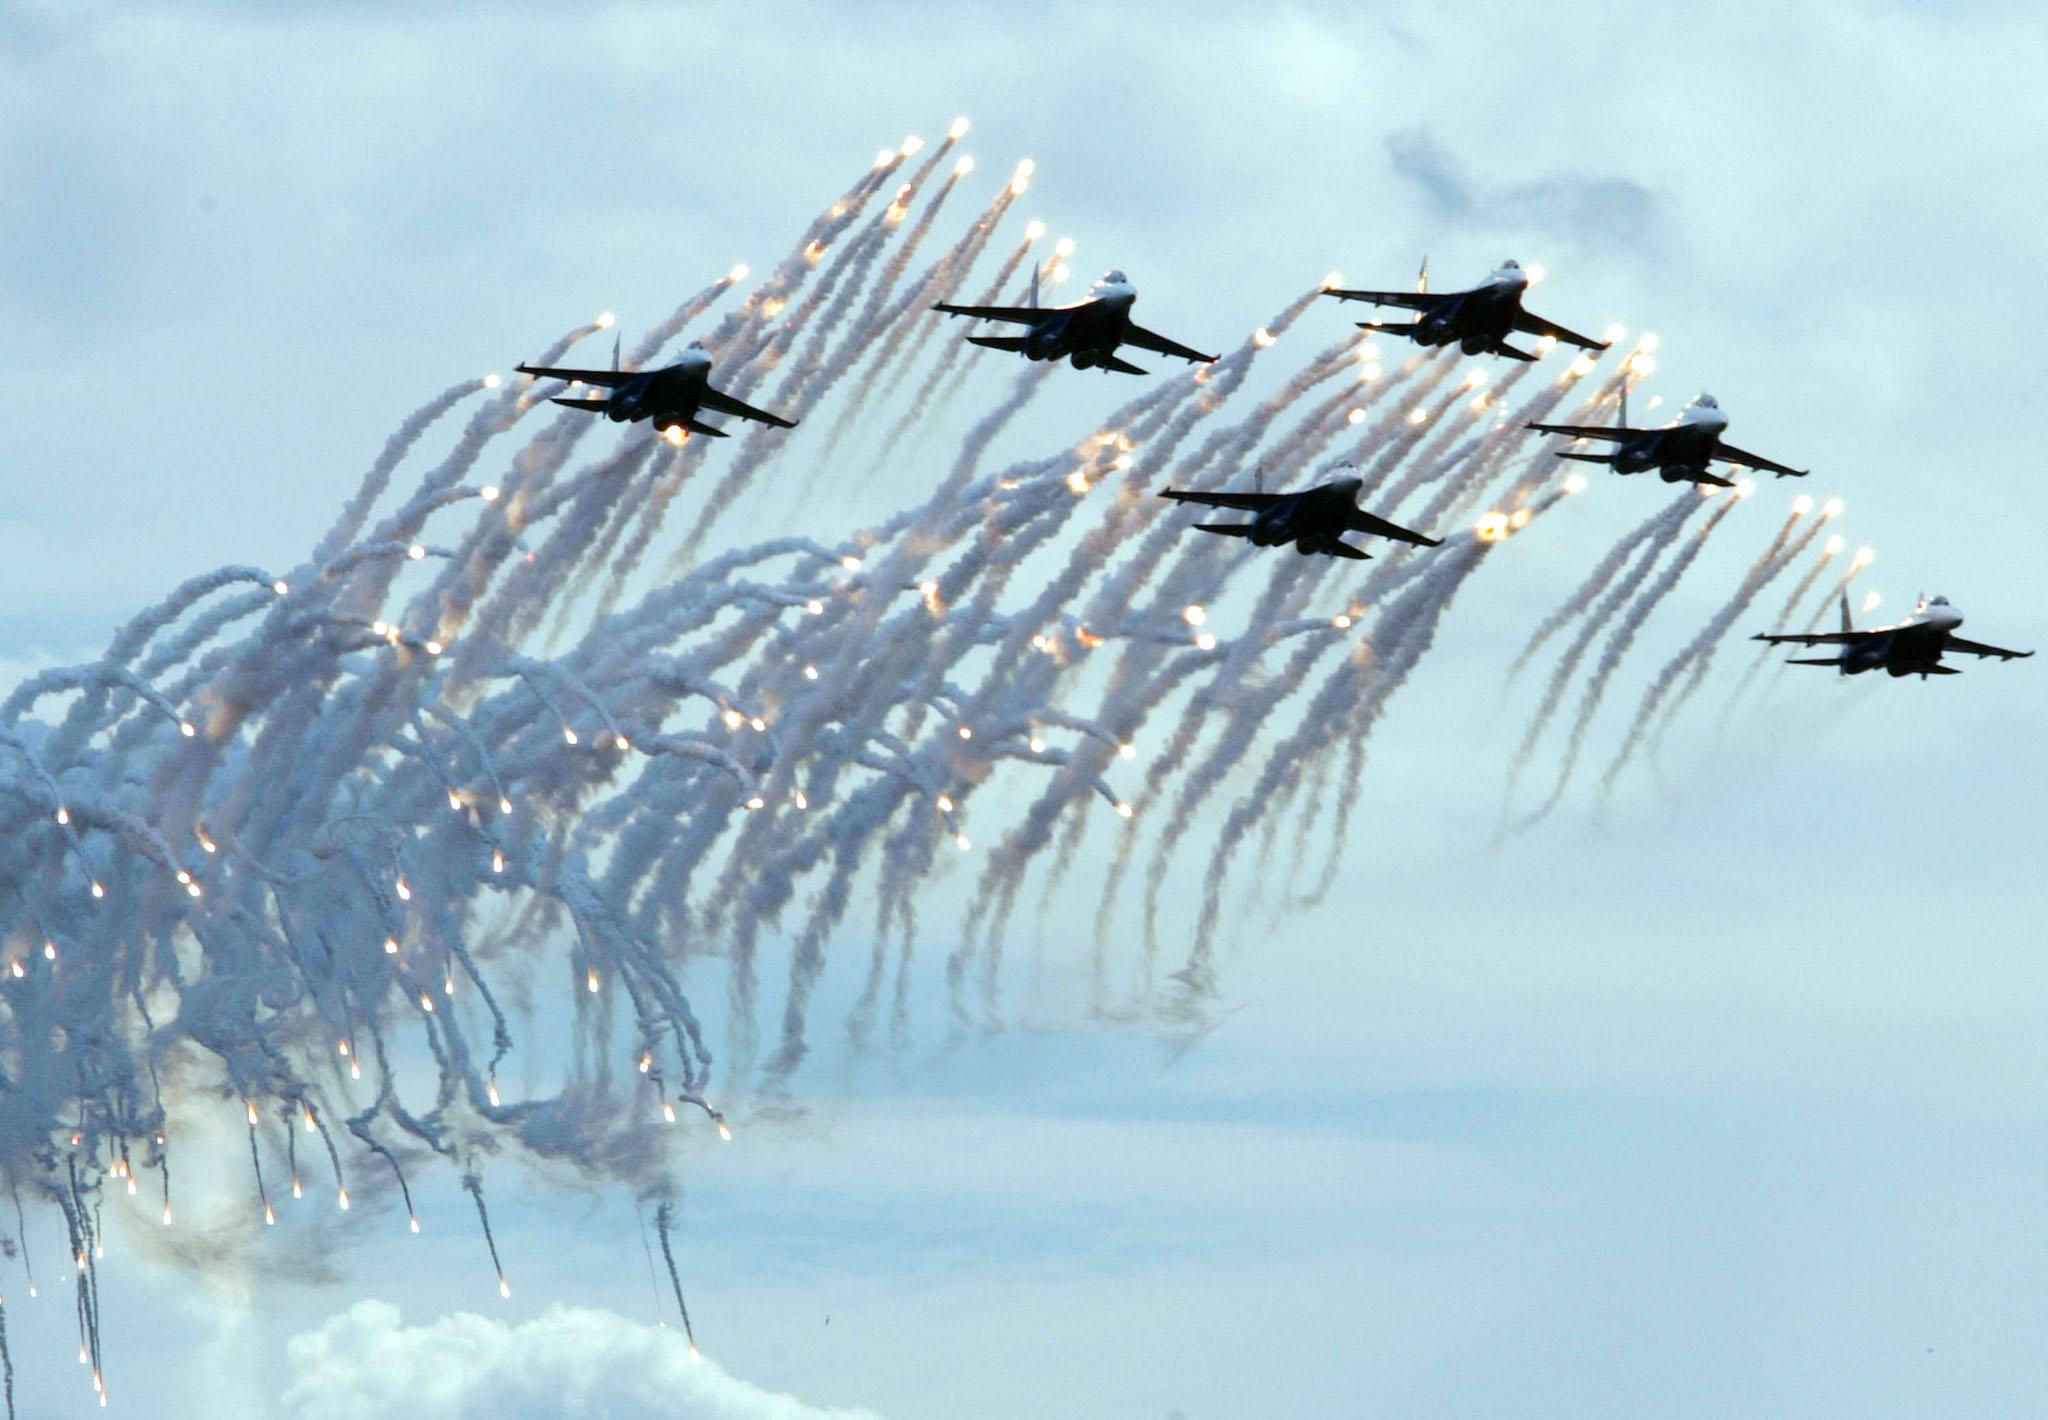 Pilots of the Russian Warriors air force aerobatic squadron fly their Su-27s and fire flares during a demonstration flight at the Moscow International Air Show